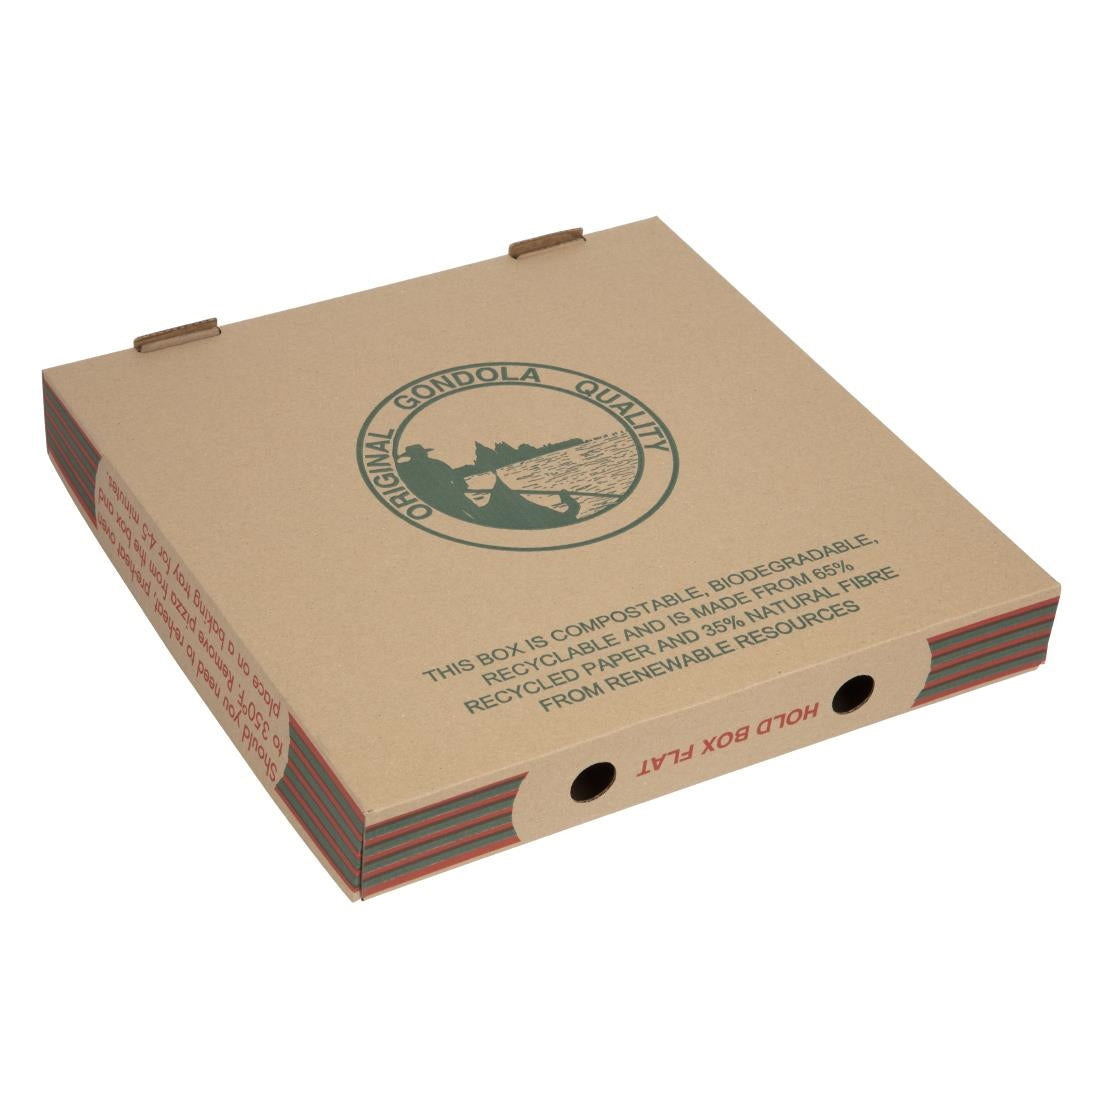 GG998 Compostable Printed Pizza Boxes 12" (Pack of 100)